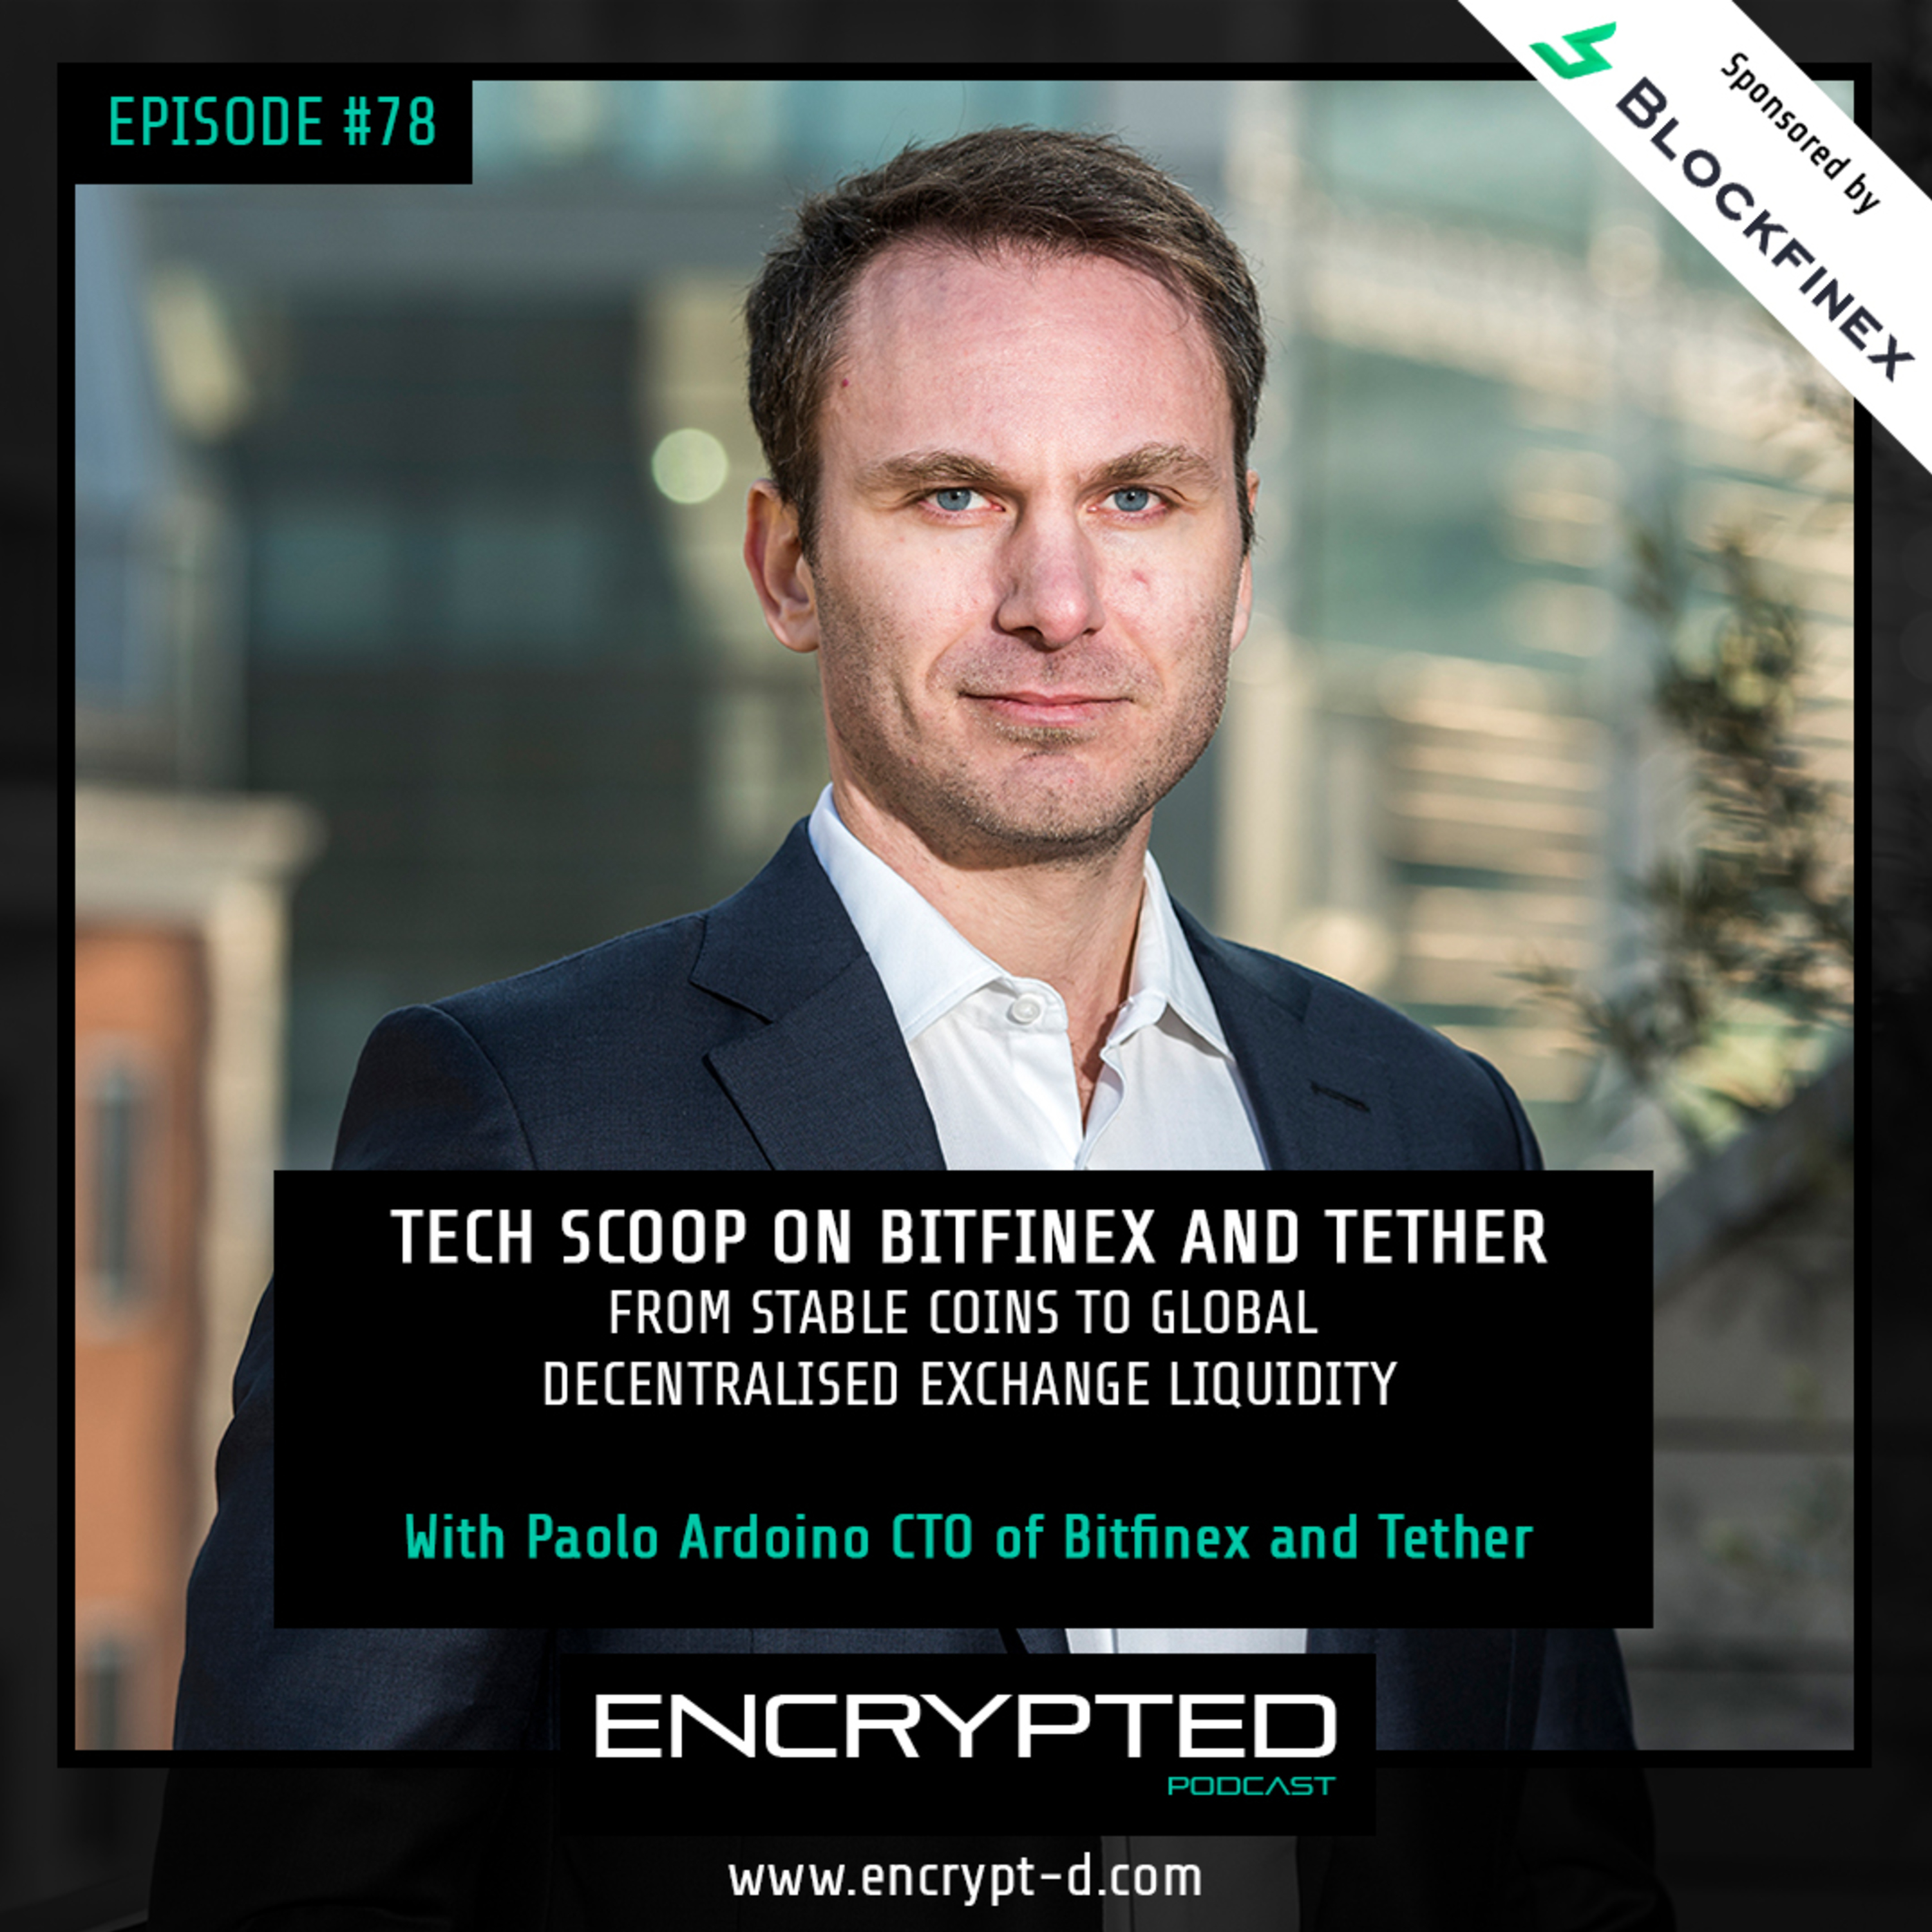 #Ep. 78: Tech Scoop on Bitfinex and Tether from Stablecoins to Global Decentralised Liquidity